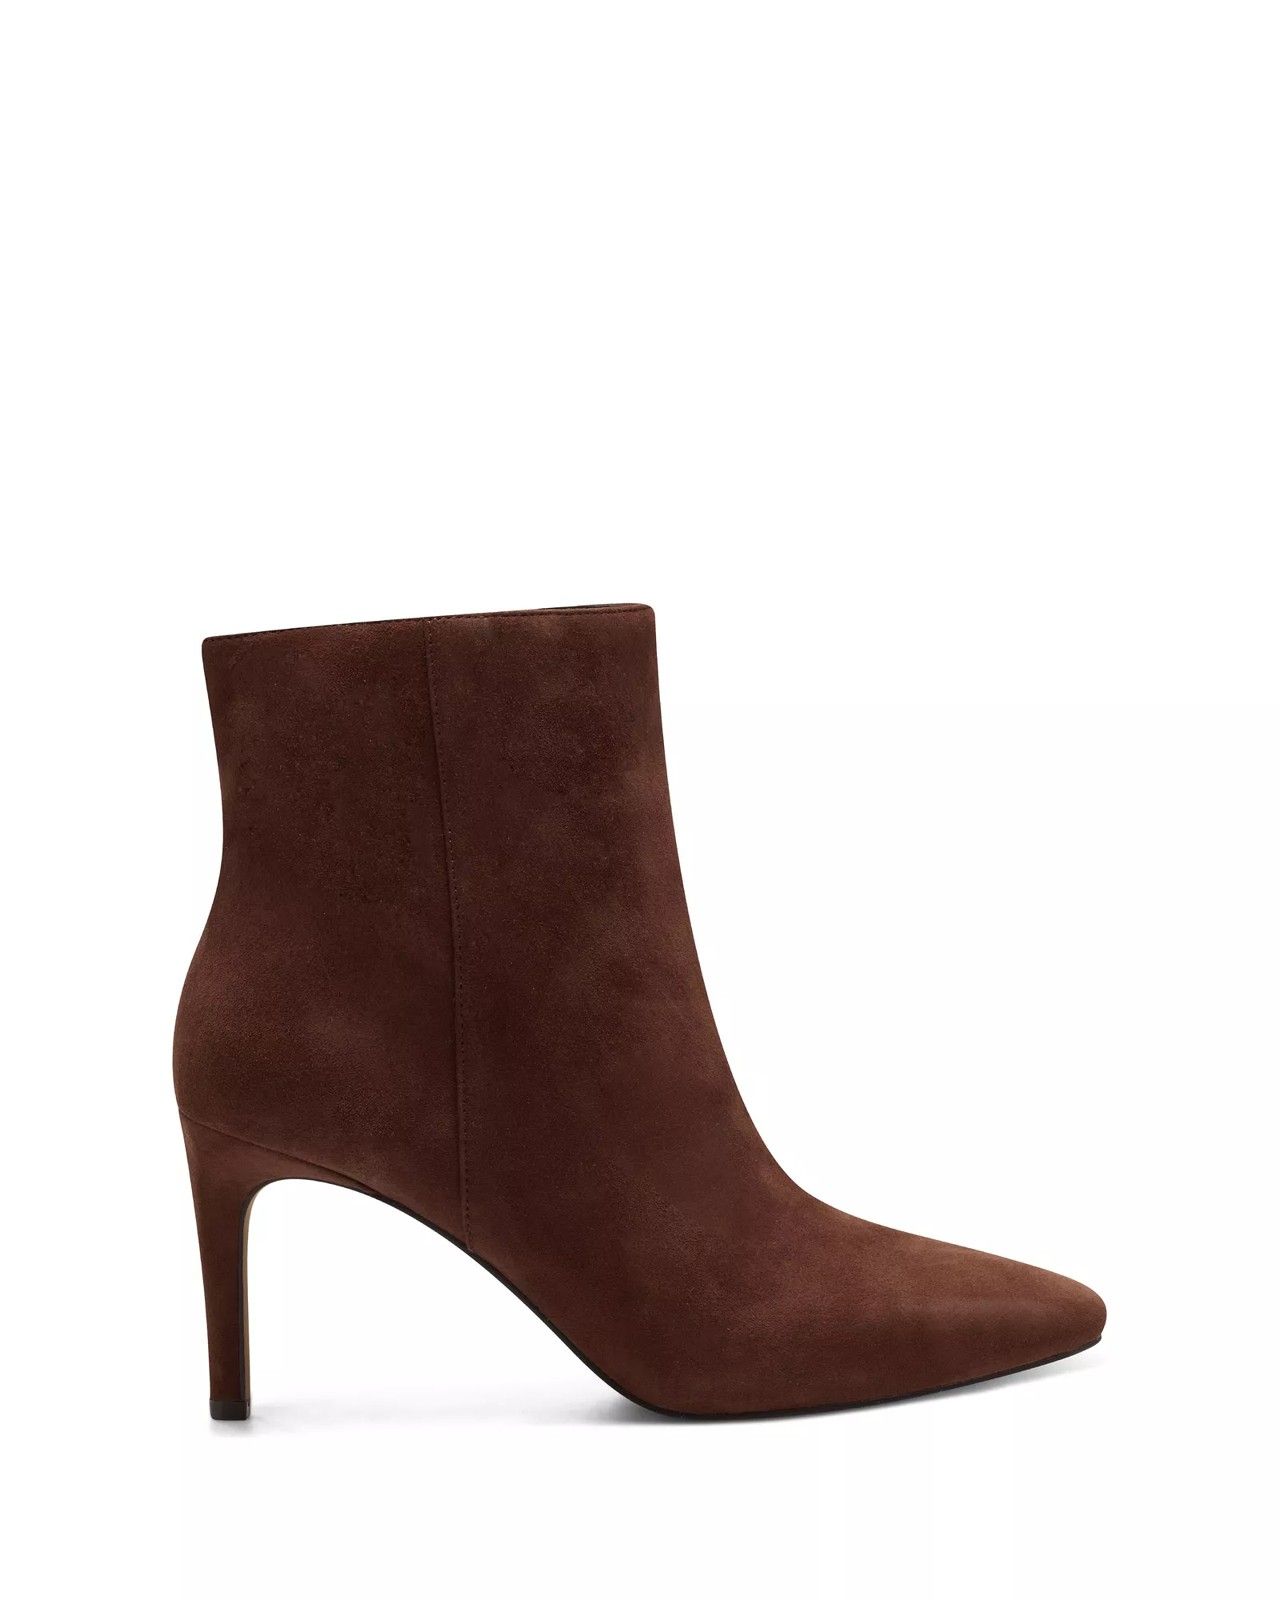 Allost High-Heel Bootie - EXCLUDED FROM PROMOTION | Vince Camuto